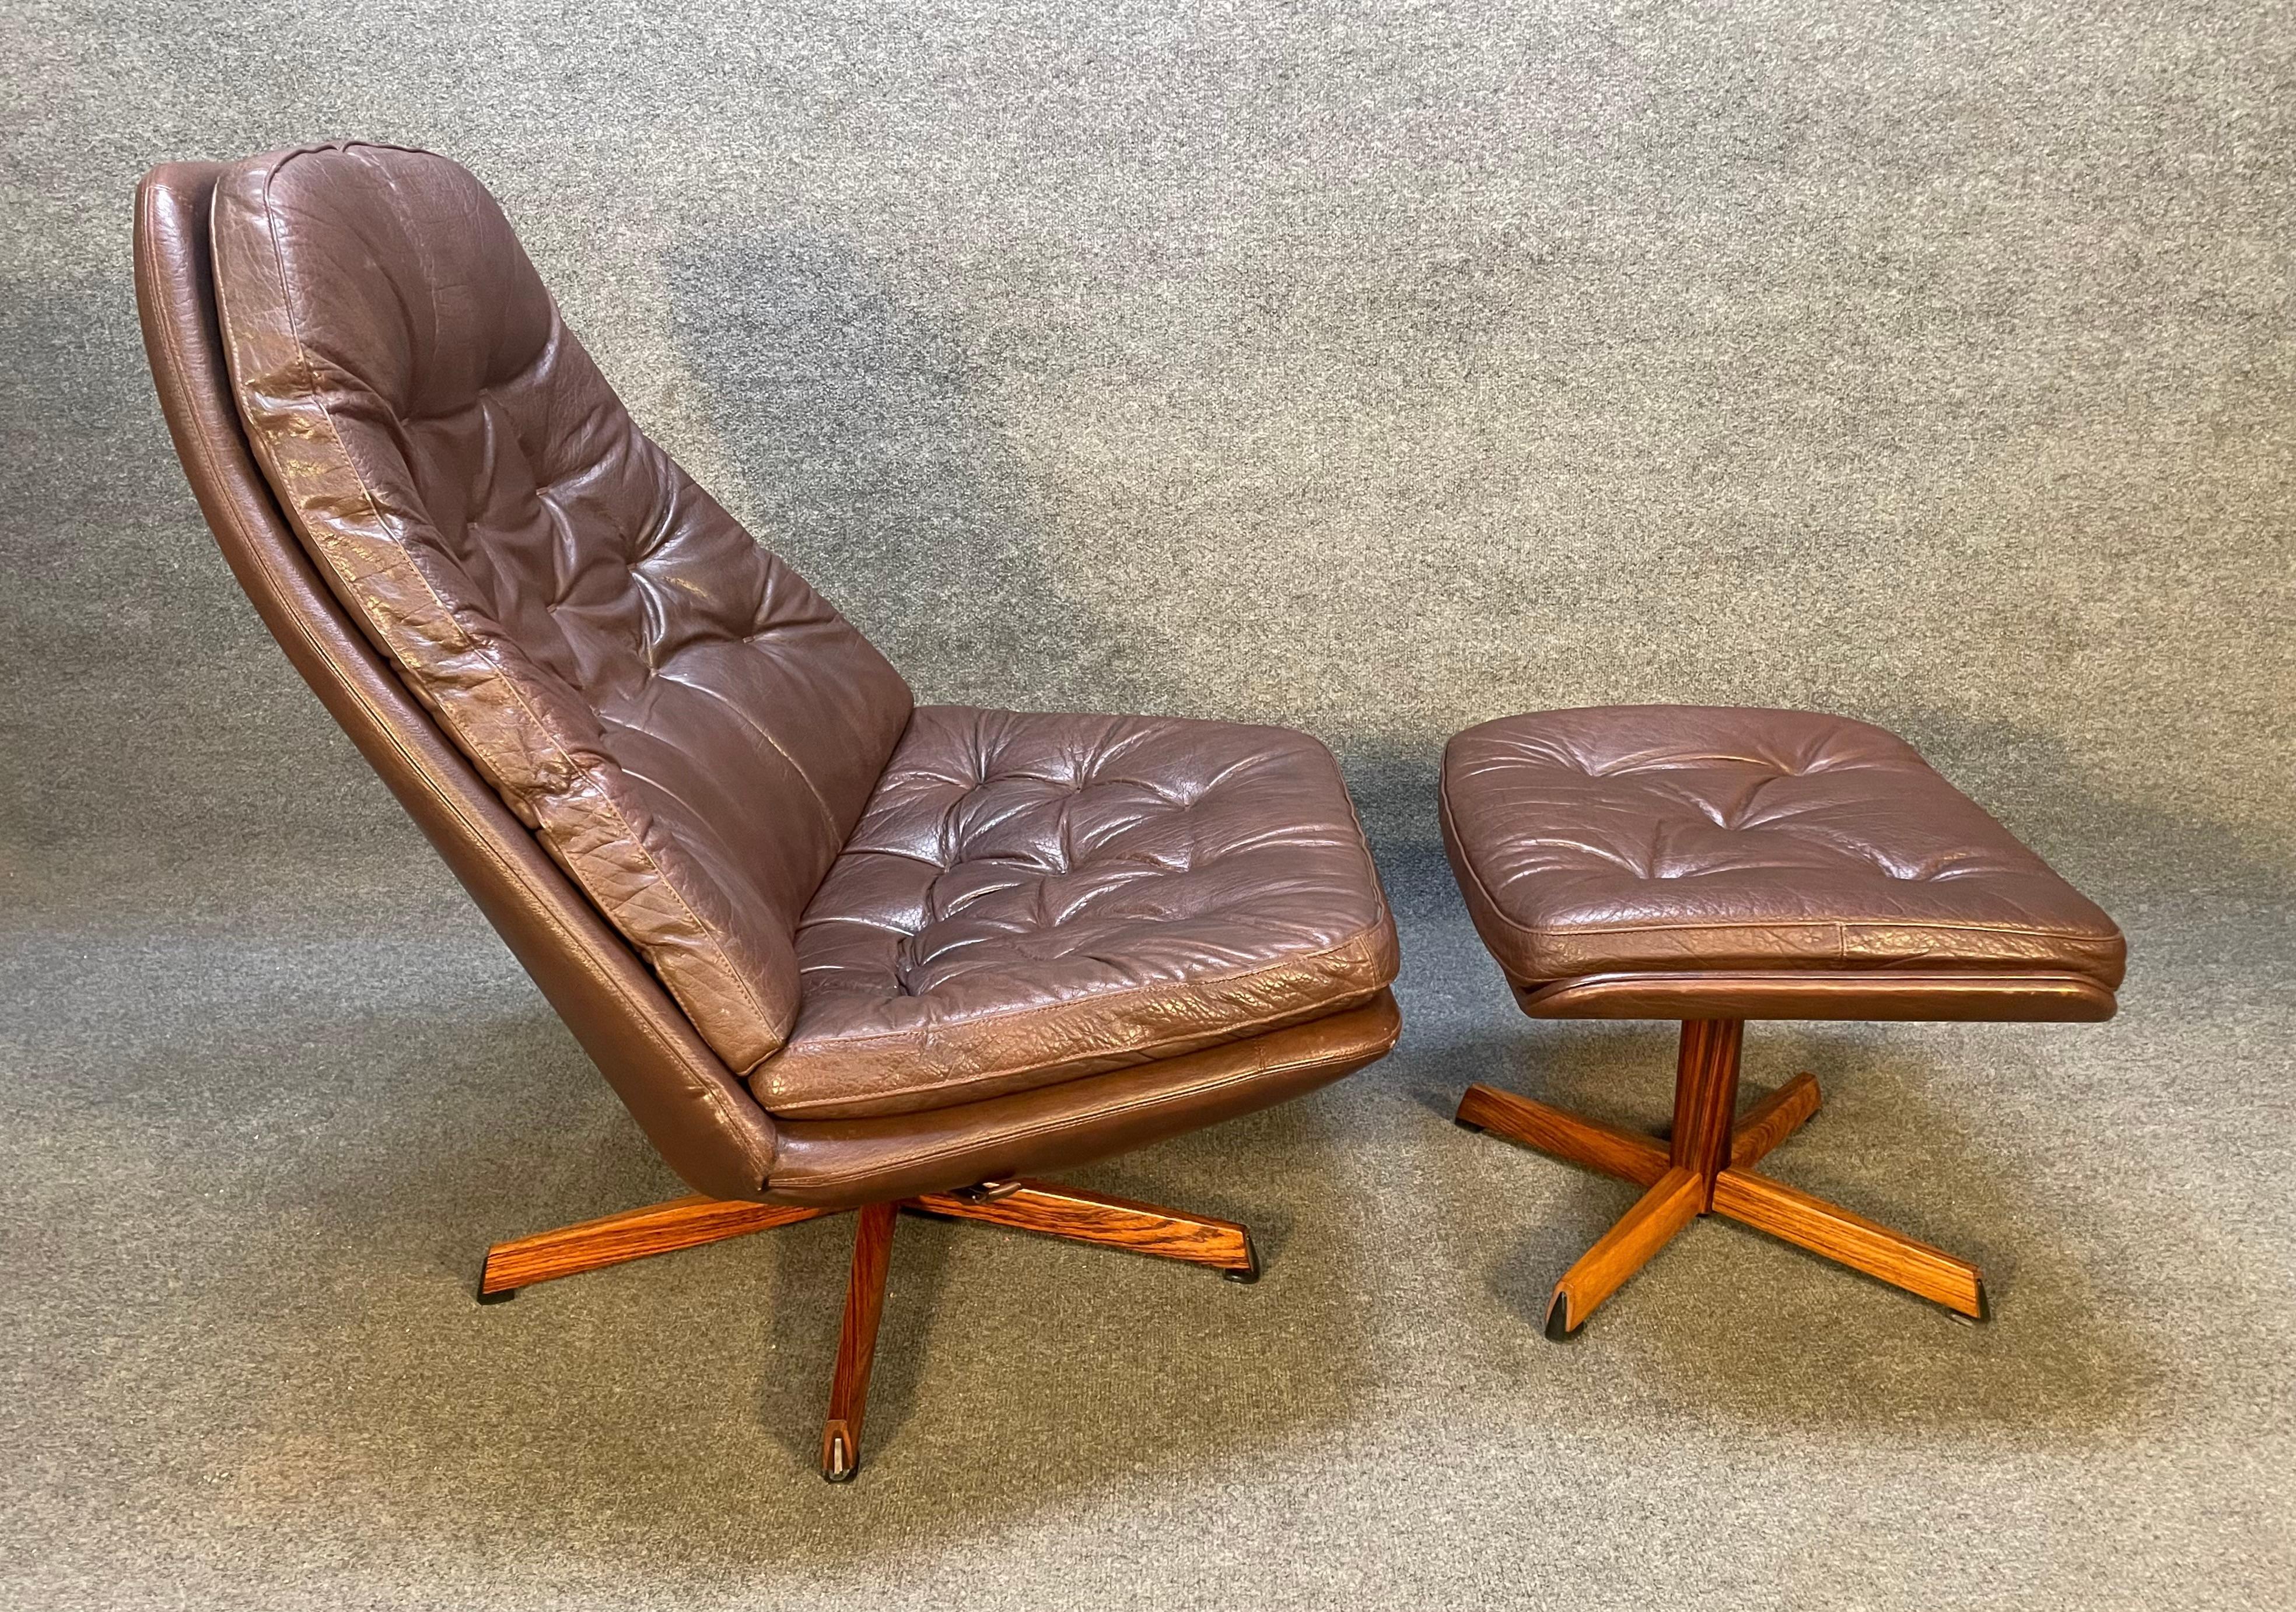 Here is a beautiful scandinavian modern lounge chair and its ottoman in leather and rosewood designed by Madsen and Schubell and manufactured by Bovenkamp in Denmark in the early 1970's.
This comfortable set, recently imported from Europe to